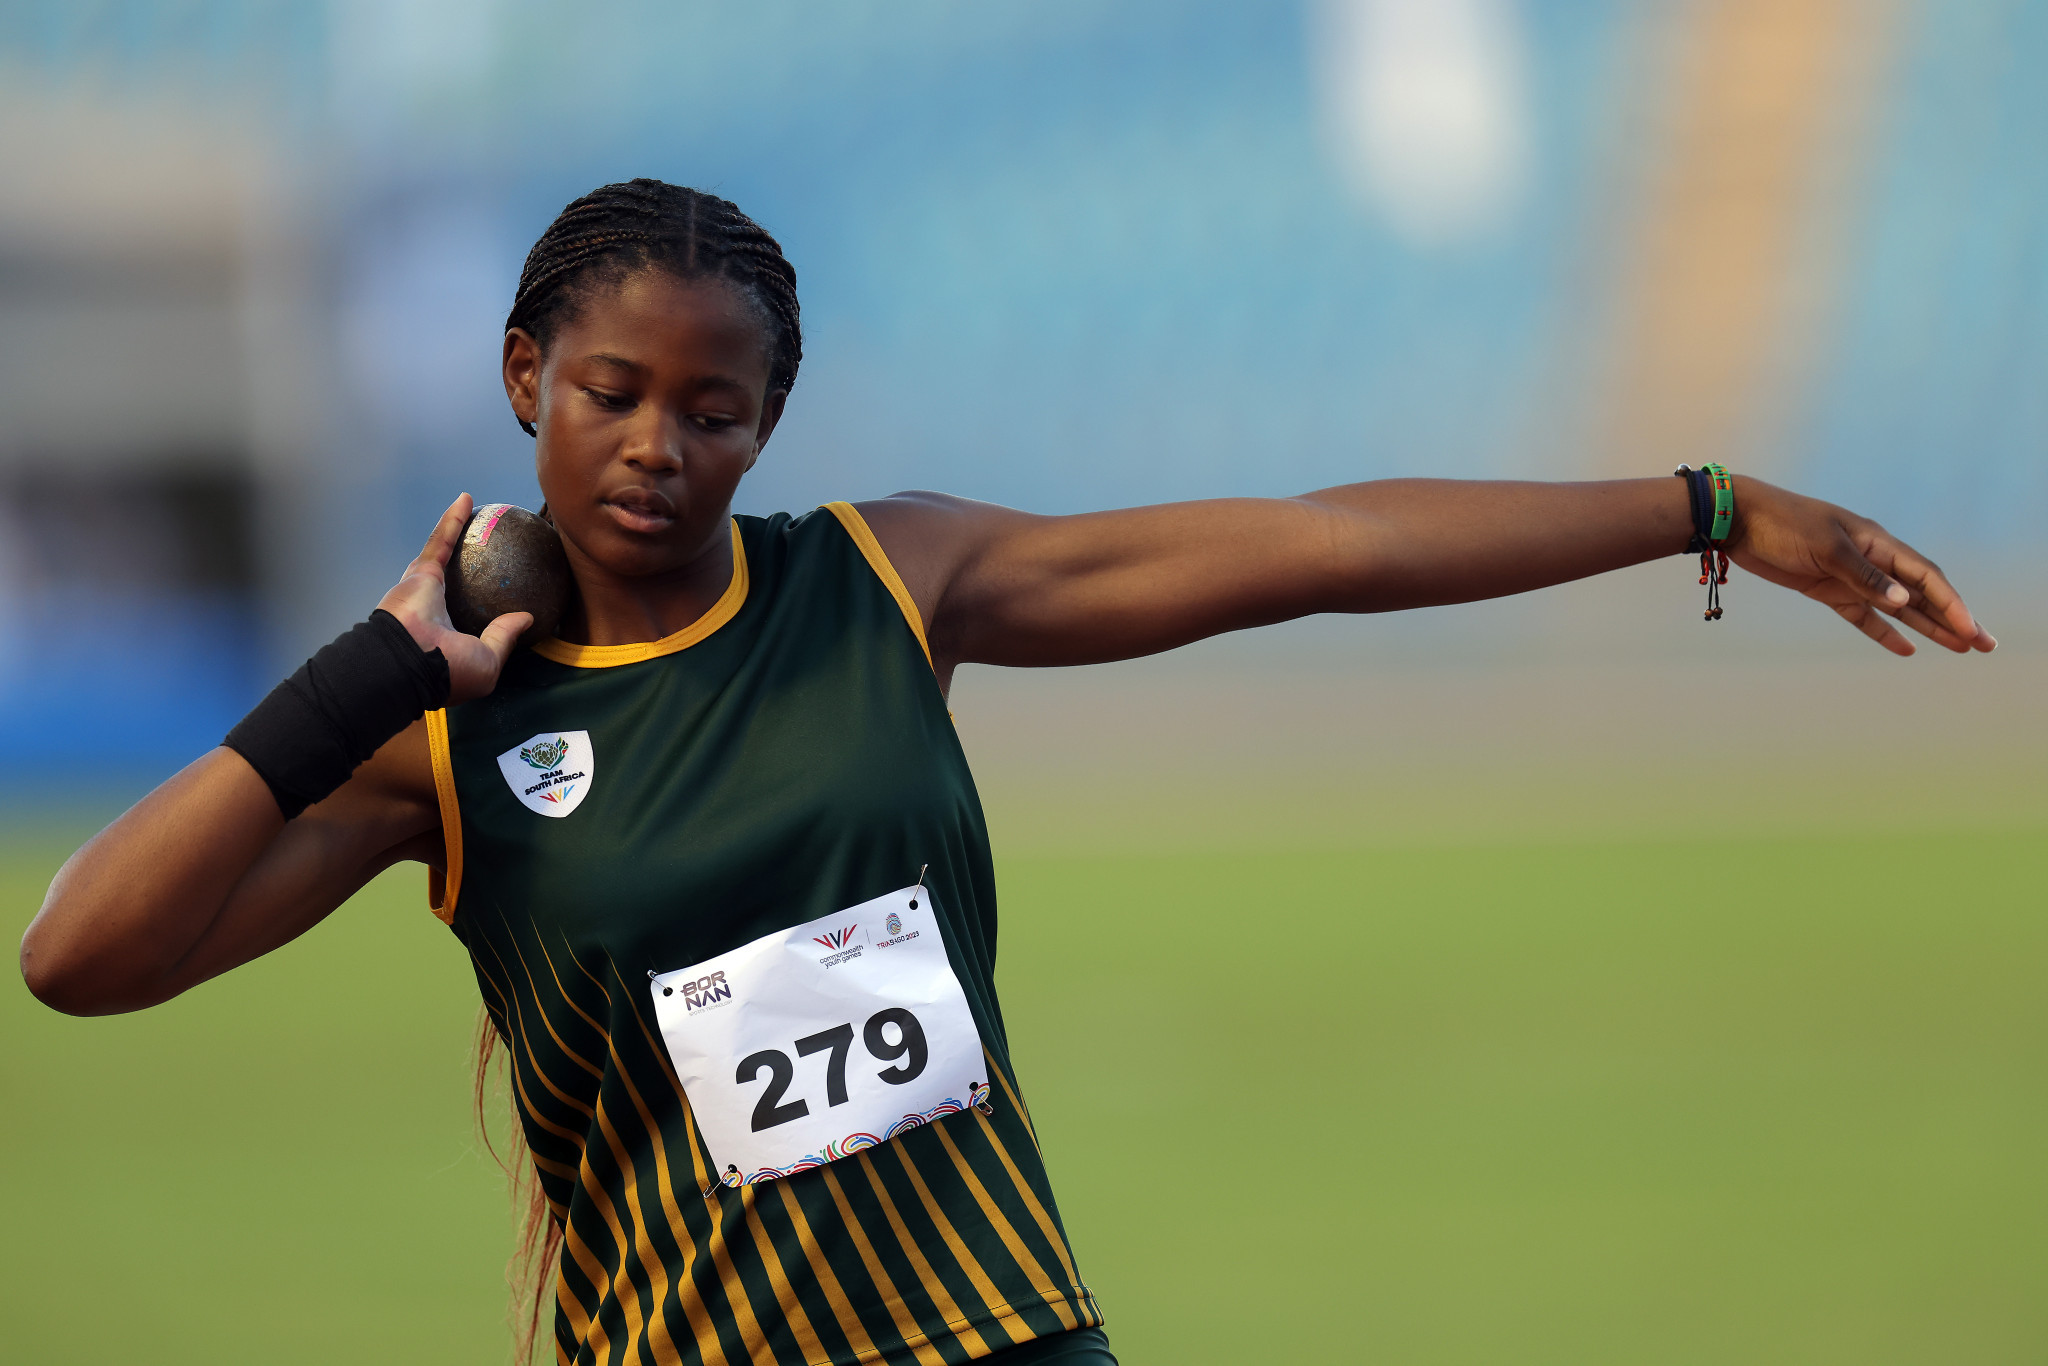 South Africa's Alicia Eli Khunou took the women's shot put Commonwealth Youth Games record to 17.97m  ©Getty Images